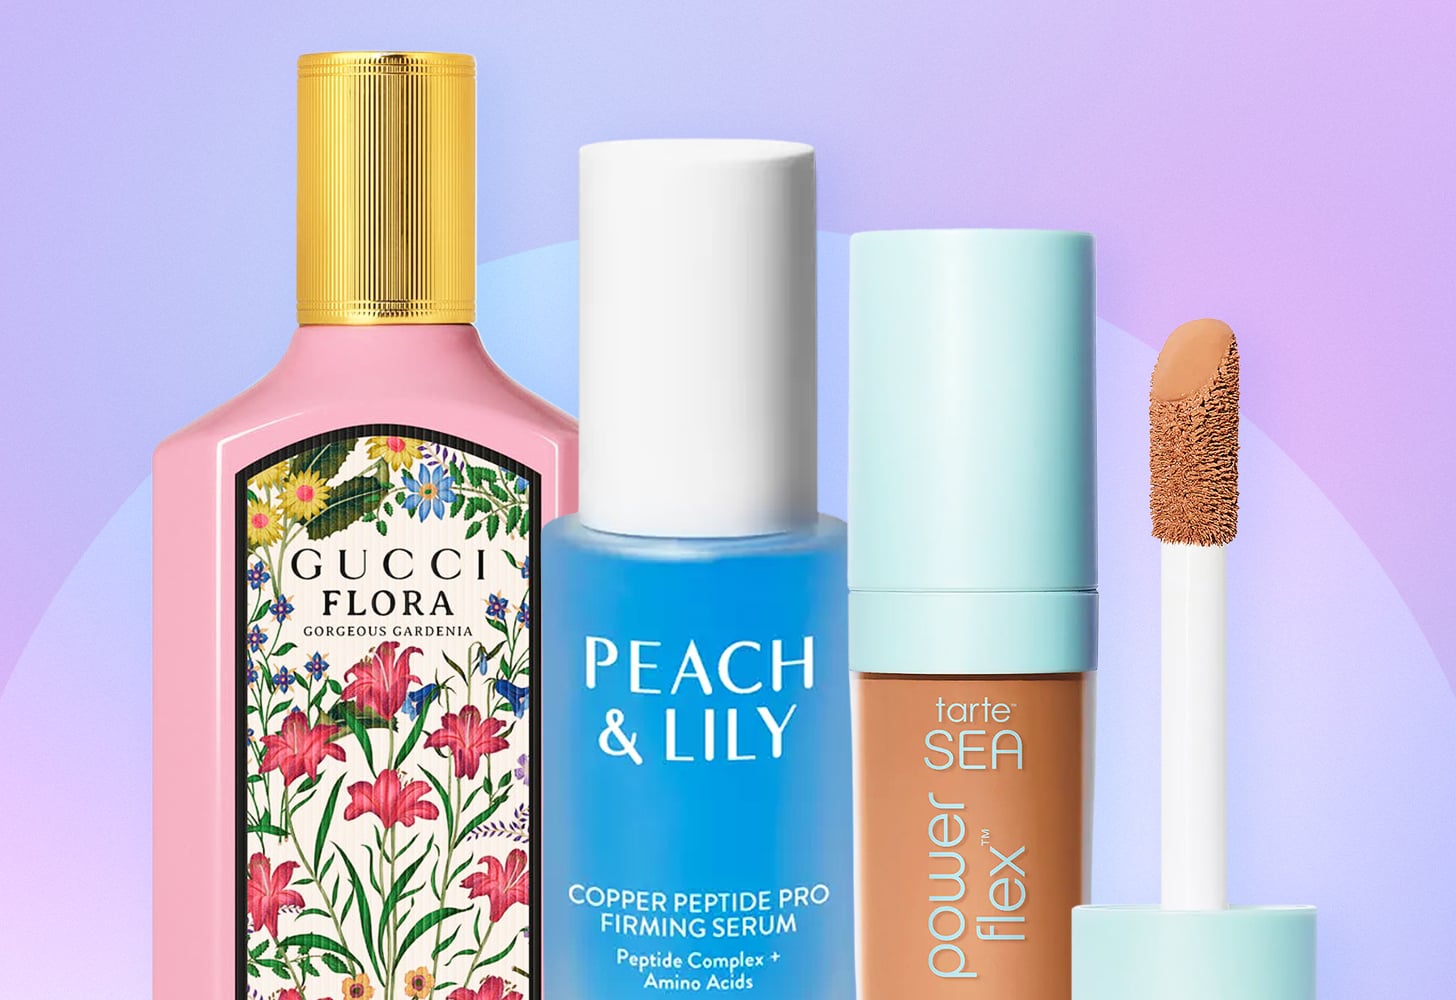 Sephora Spring Savings Event 2023 Preview - Beauty Deals BFF